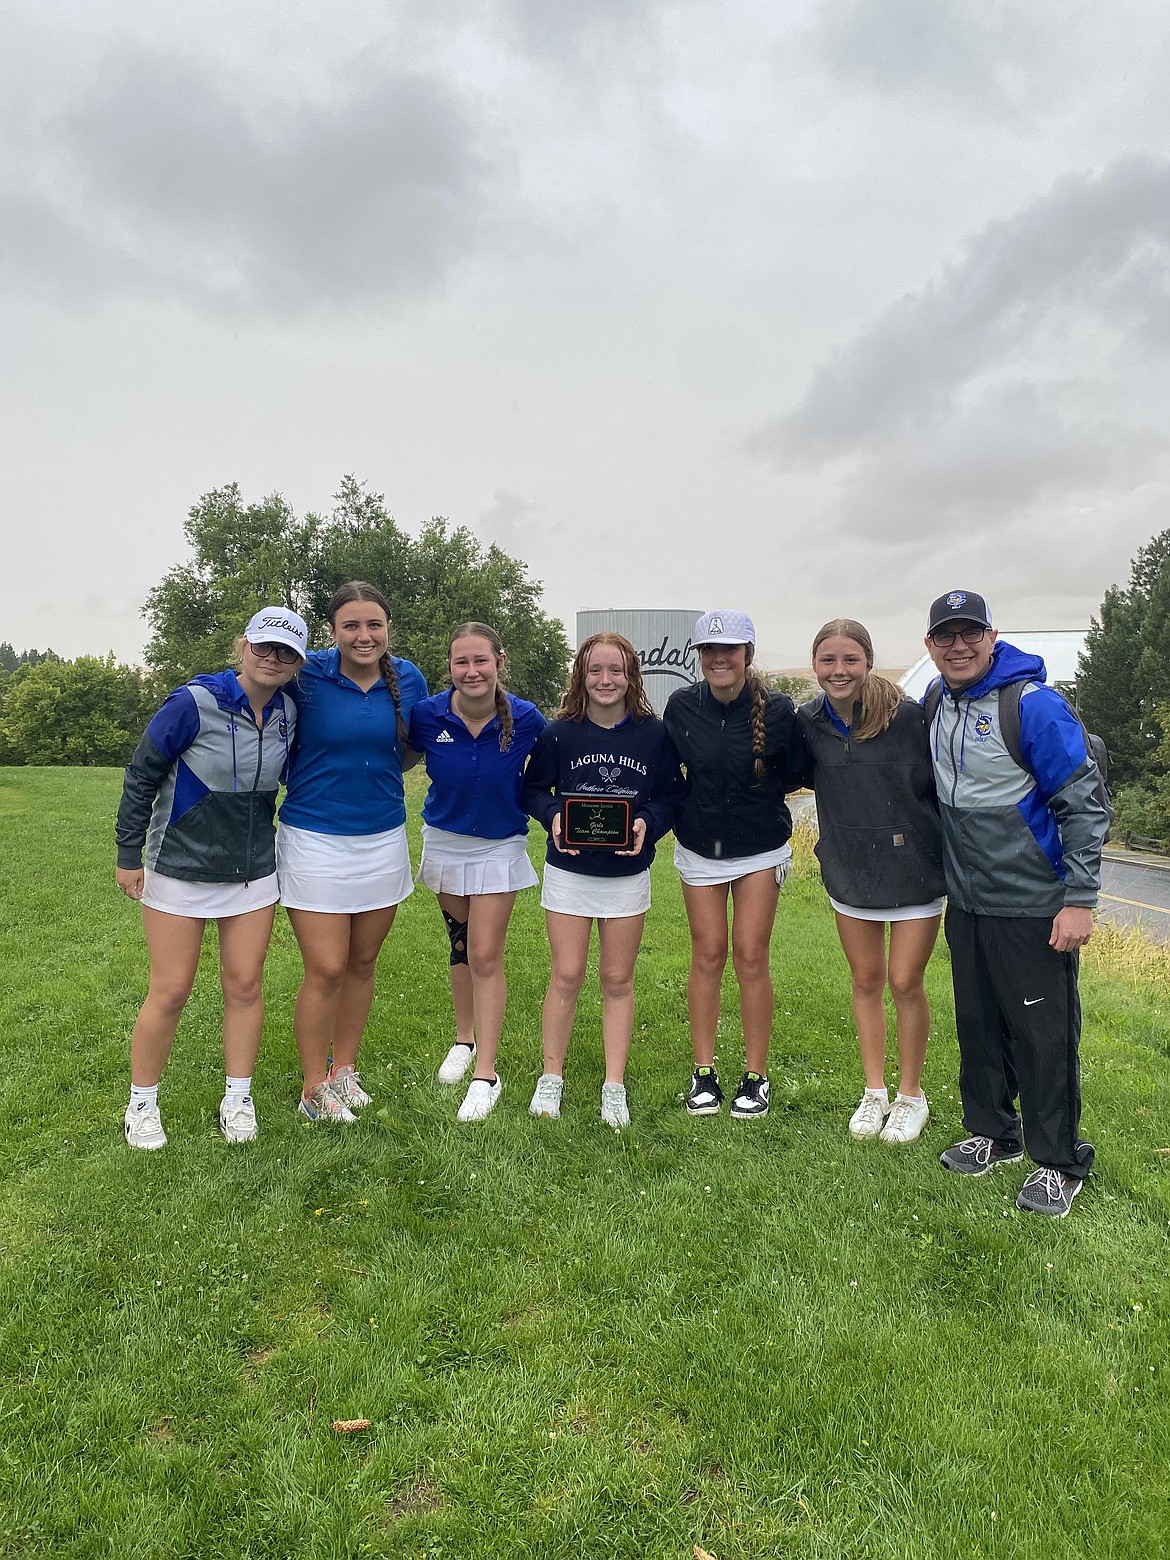 Courtesy photo
Coeur d'Alene's girls won the Moscow Invitational on Monday at the University of Idaho Golf Course in Moscow. From left are Chloe Orear, Aniston Ewing, Addie Garcia, Mady Riley, Sophia Vignale, Stella Deitz and coach Jeff Lake.